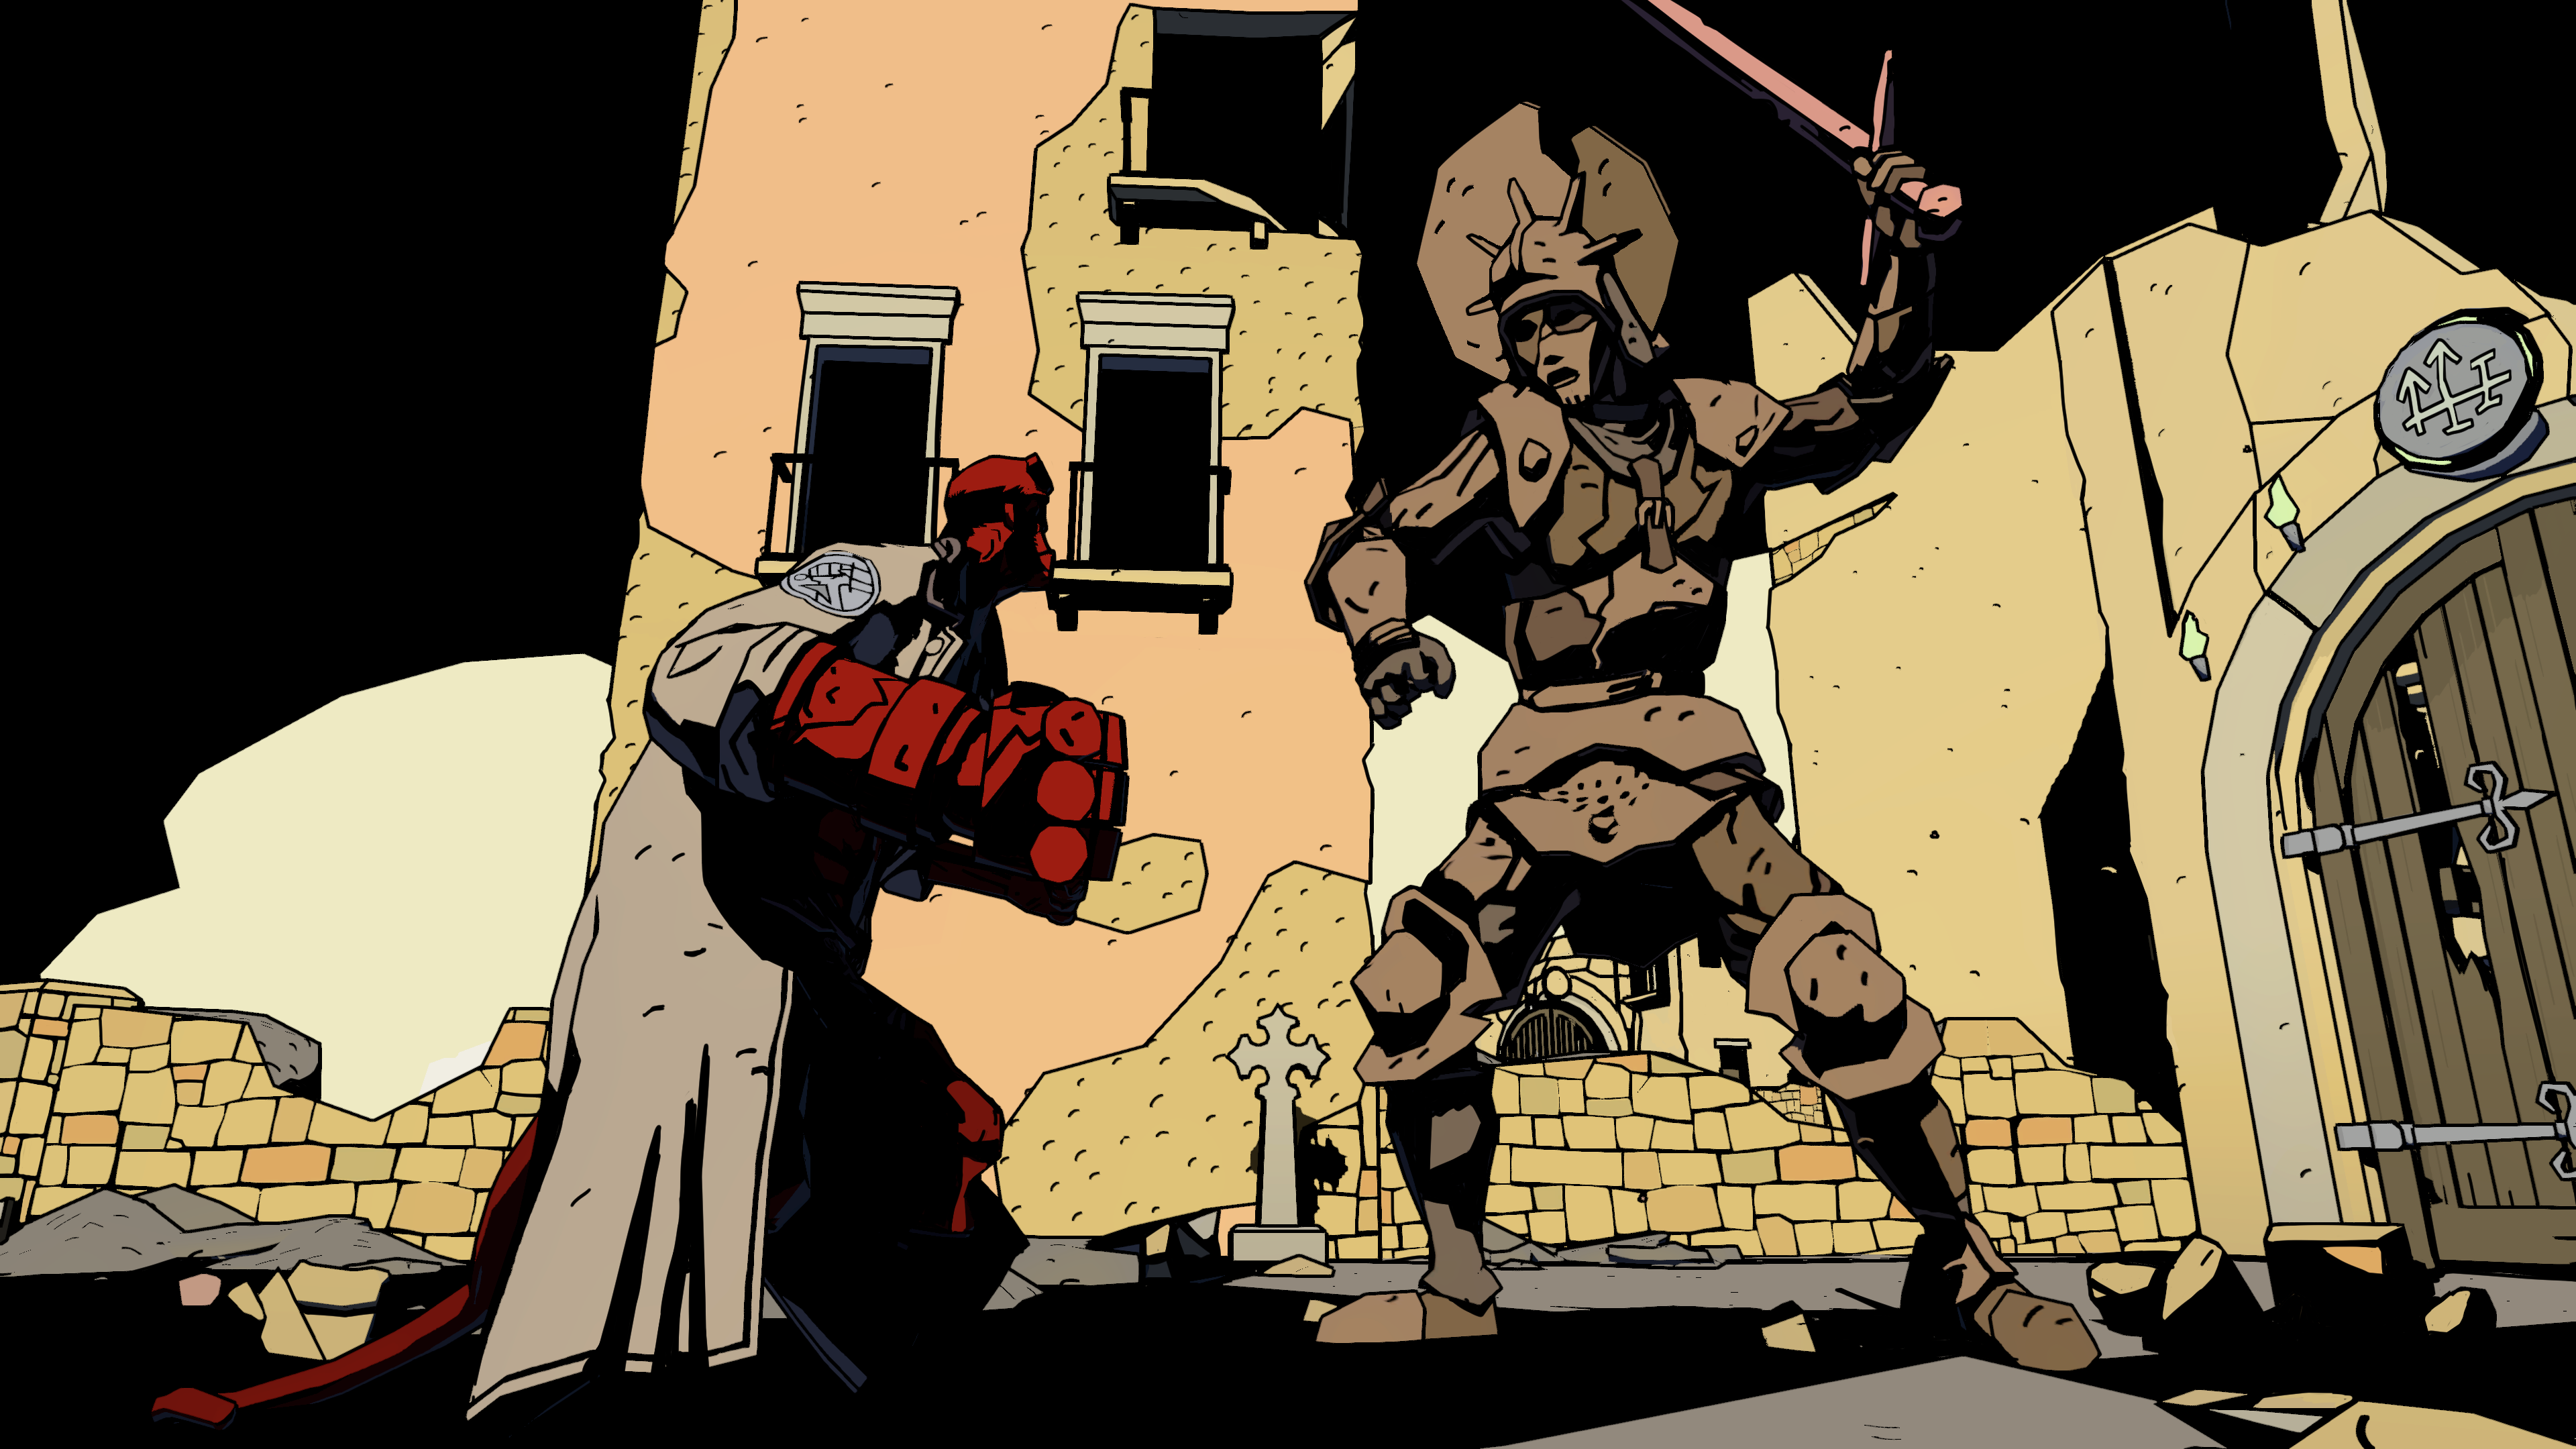 hellboy-web-of-wyrd-review-no-successor-to-the-throne-of-hades